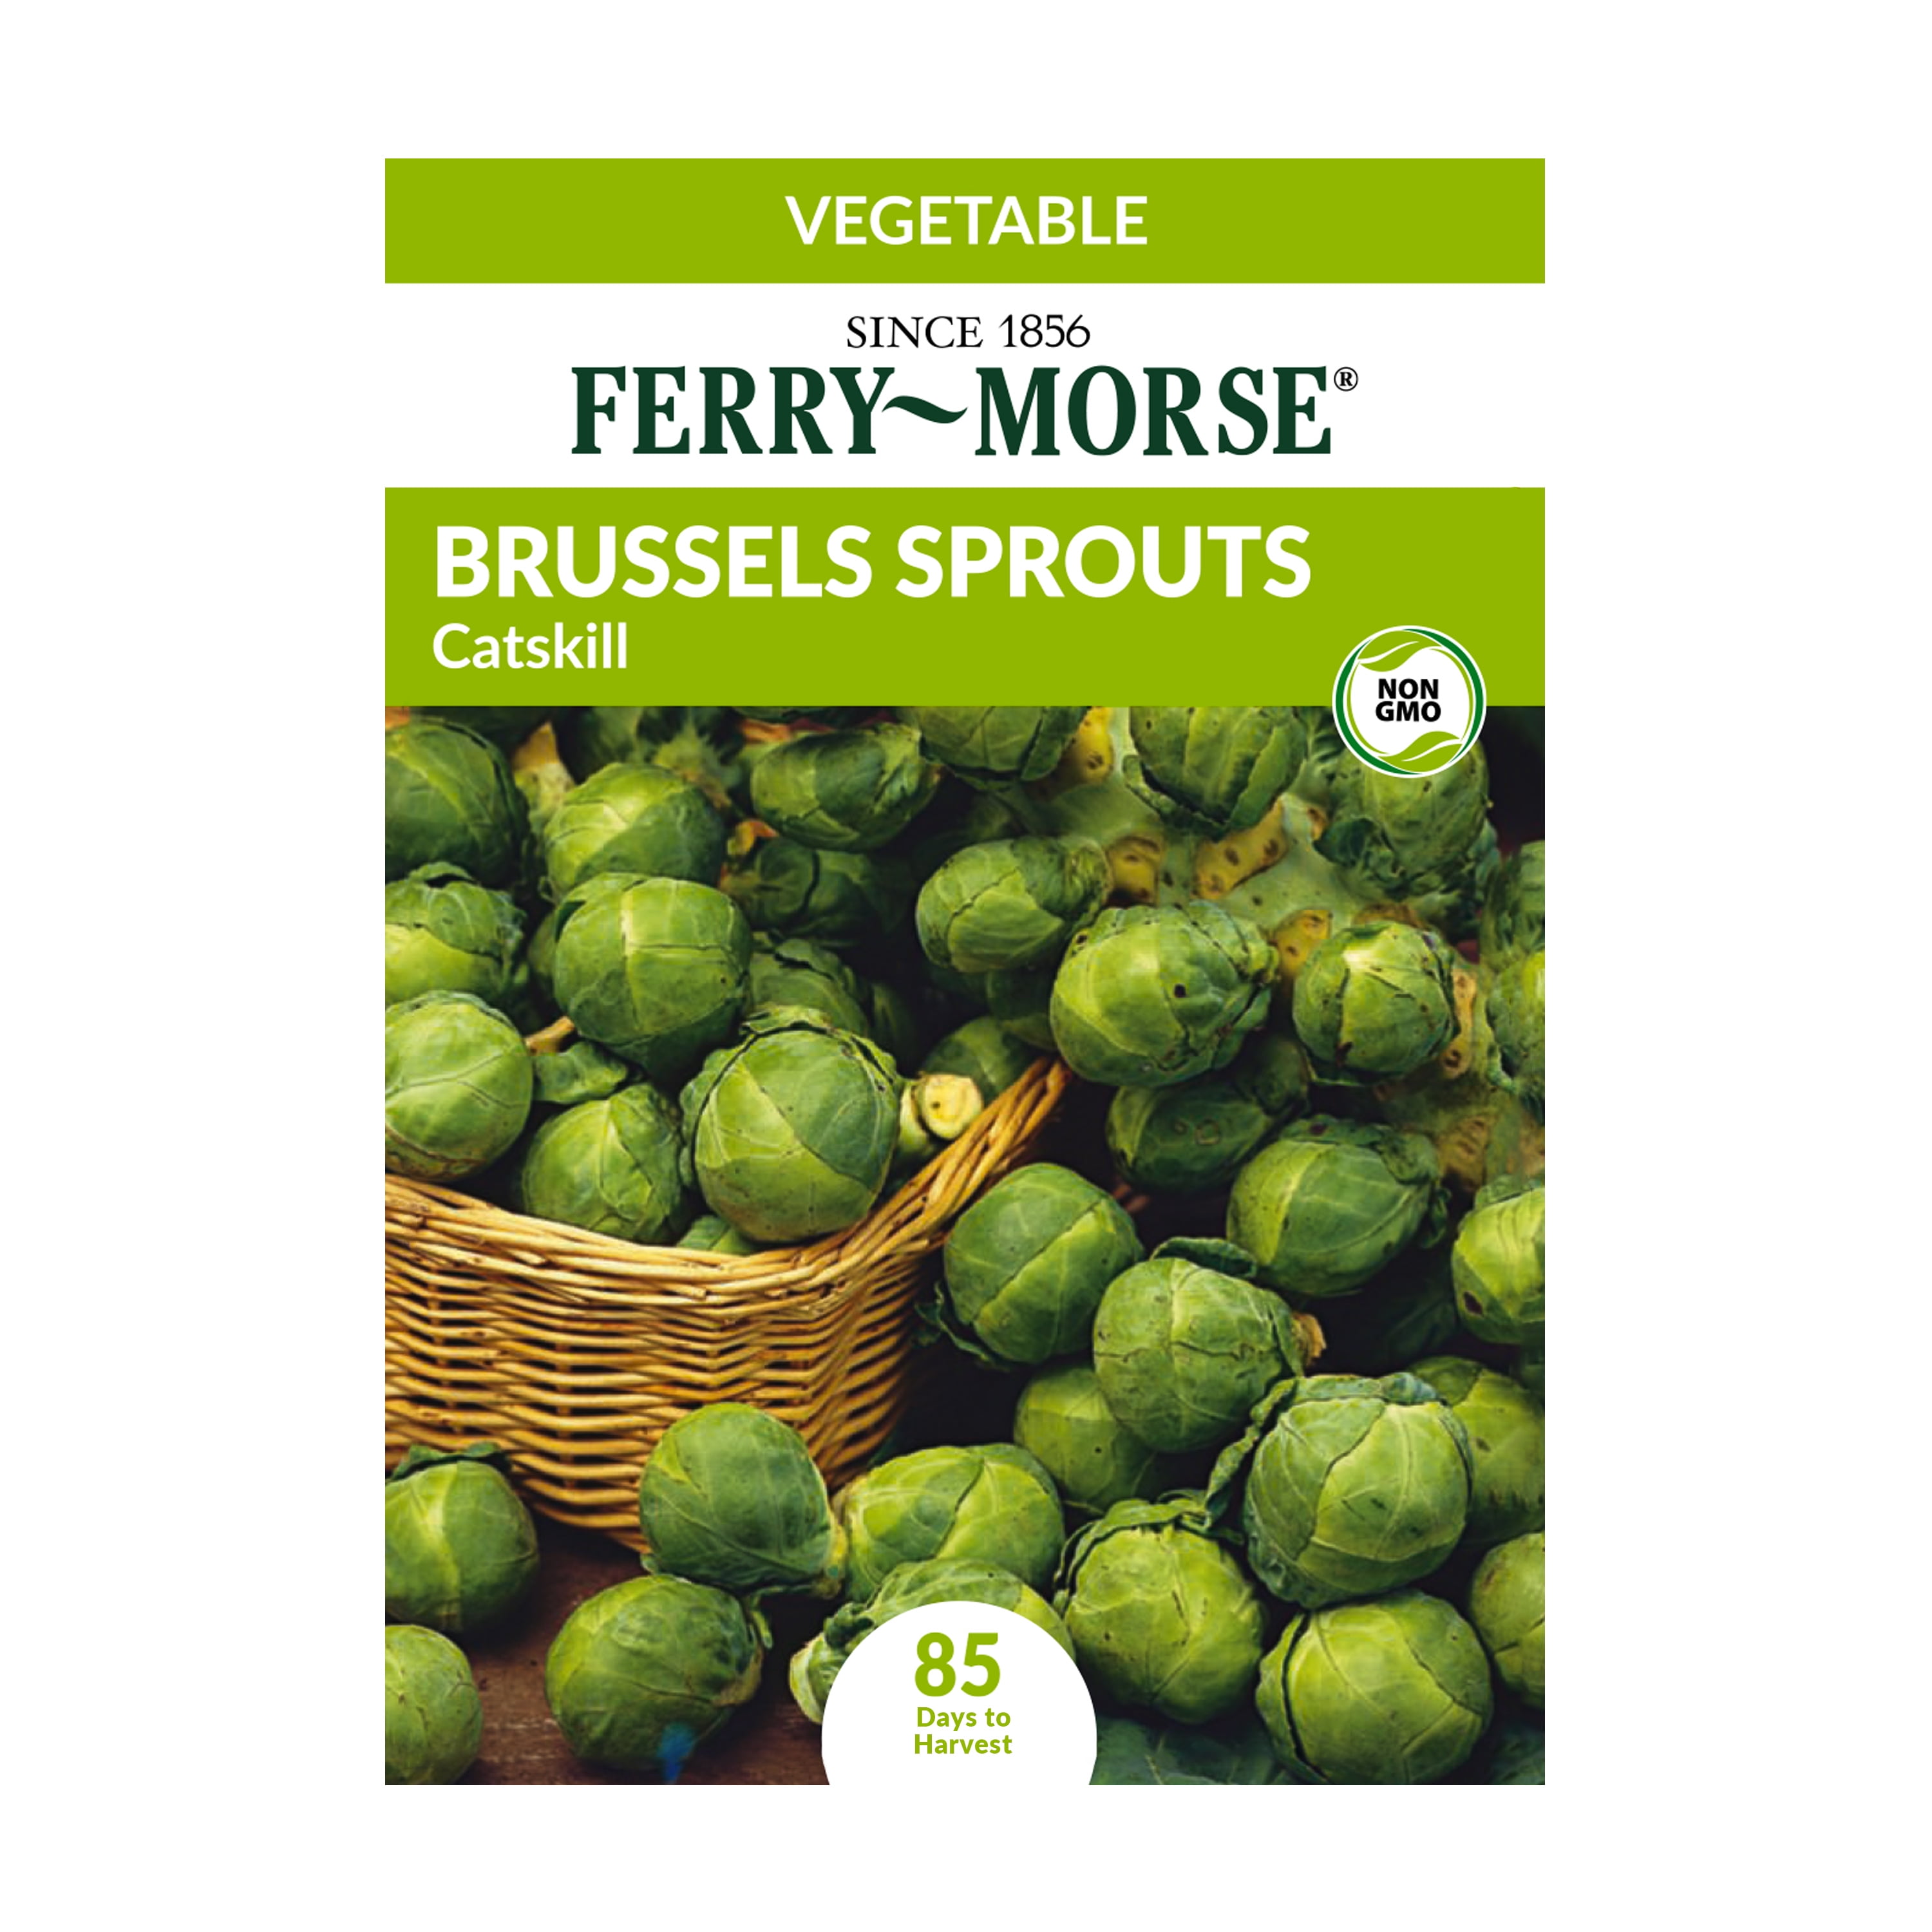 Ferry-Morse 82.5MG Brussels Sprouts Catskill Vegetable Plant Seeds (1 Pack)- Seed Gardening, Full Sunlight